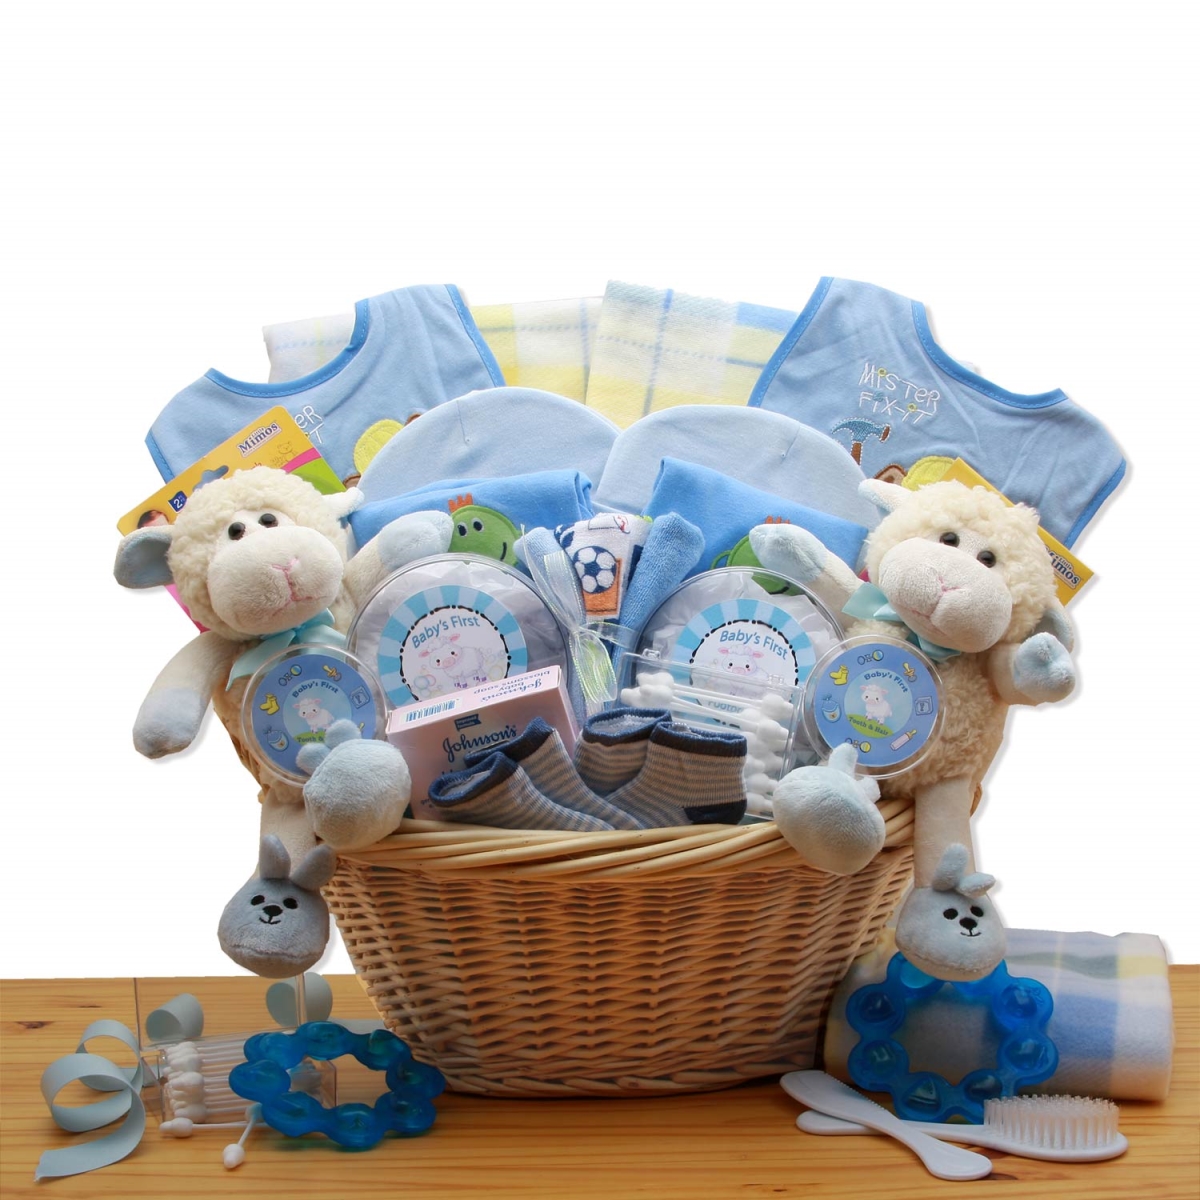 890811-b Double Delight Twins New Baby Gift Basket - Blue